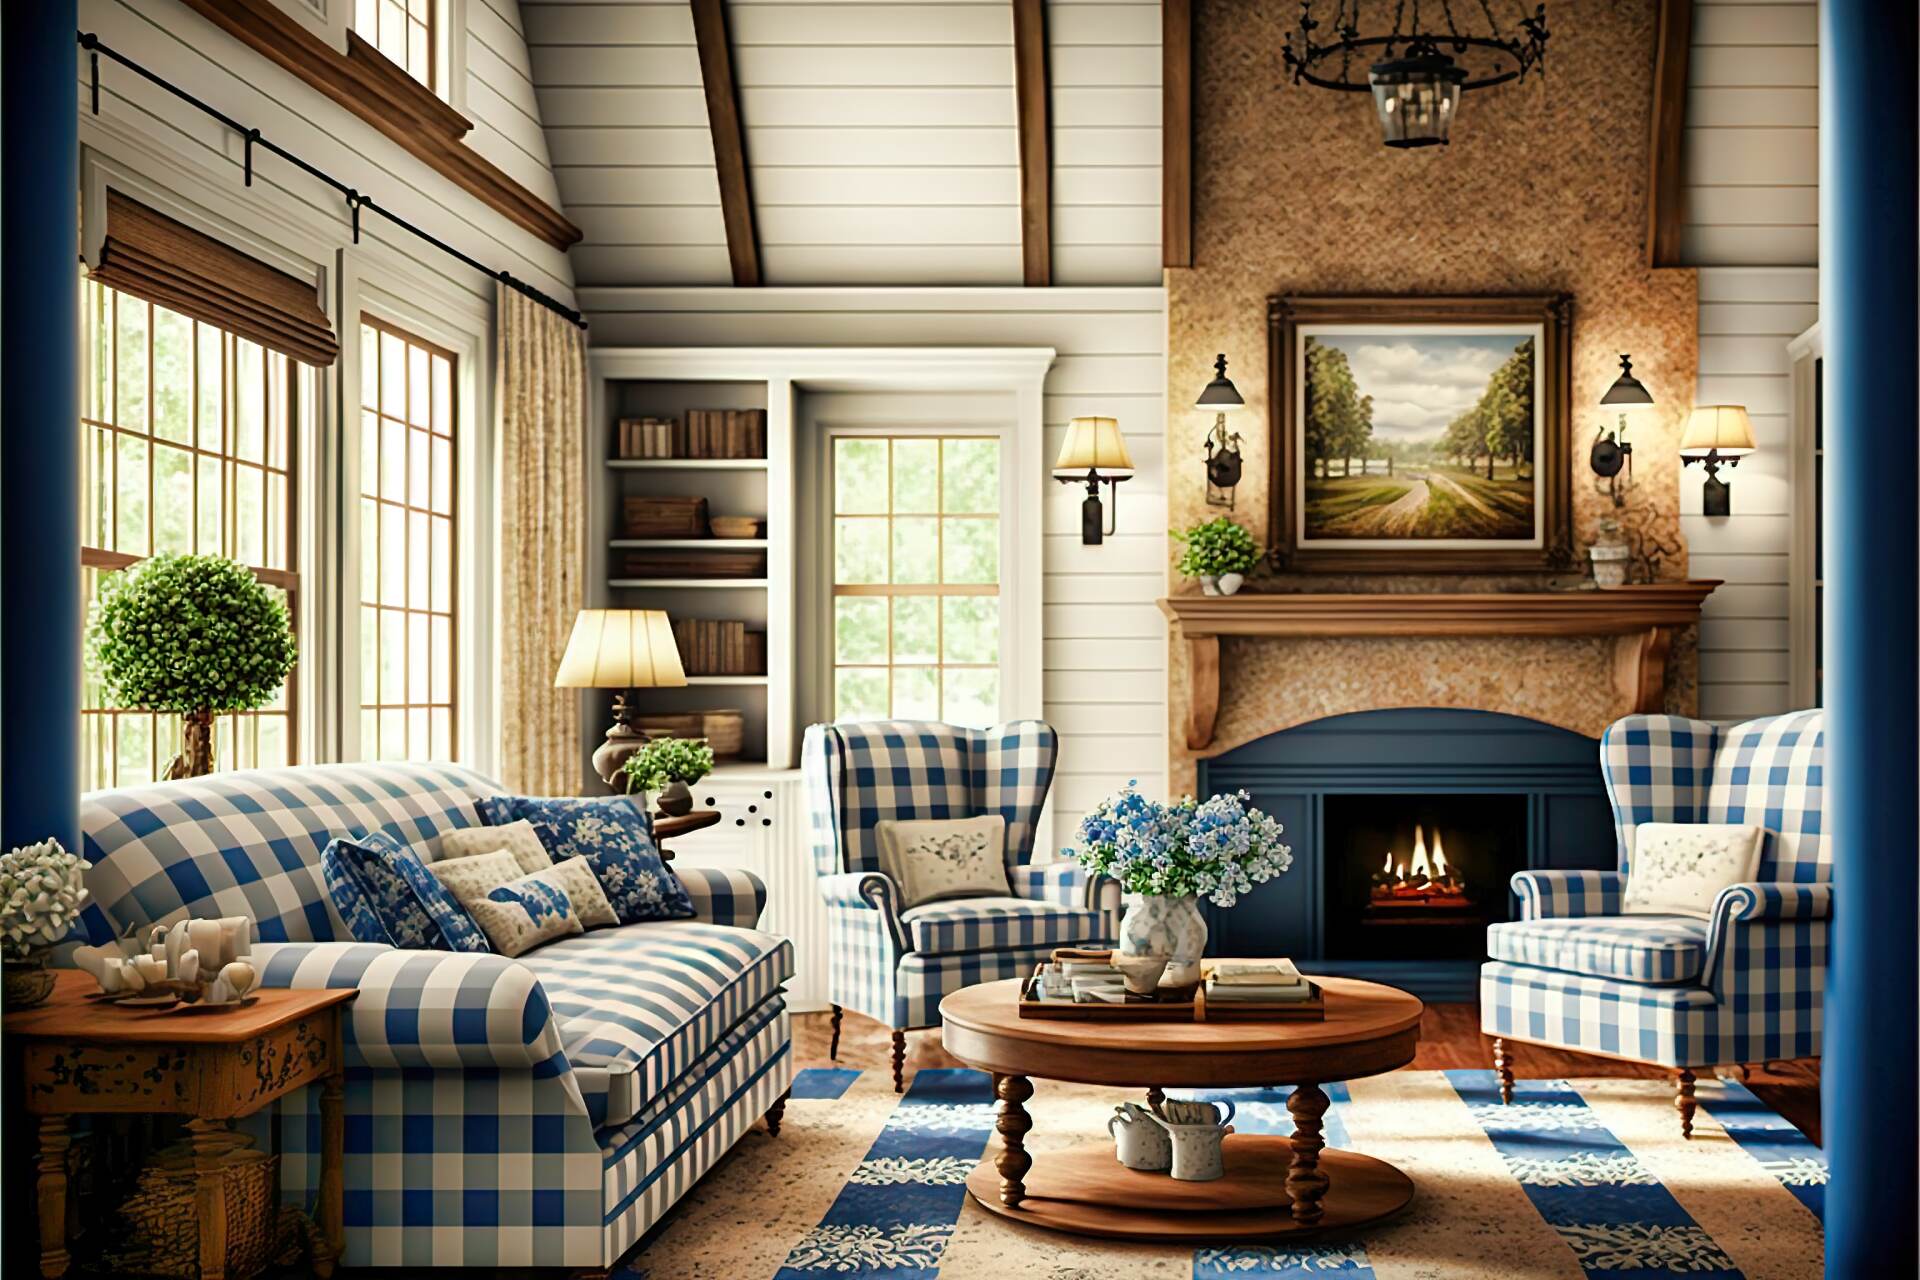 This Charming Modern Living Room Features A Country Style. A Wooden Armchair And A Matching Sofa Provide A Cozy Seating Area, While A Blue And White Checkered Rug Adds A Classic Touch. A Large Stone Fireplace And Plenty Of Cozy Throw Pillows Complete The Look.